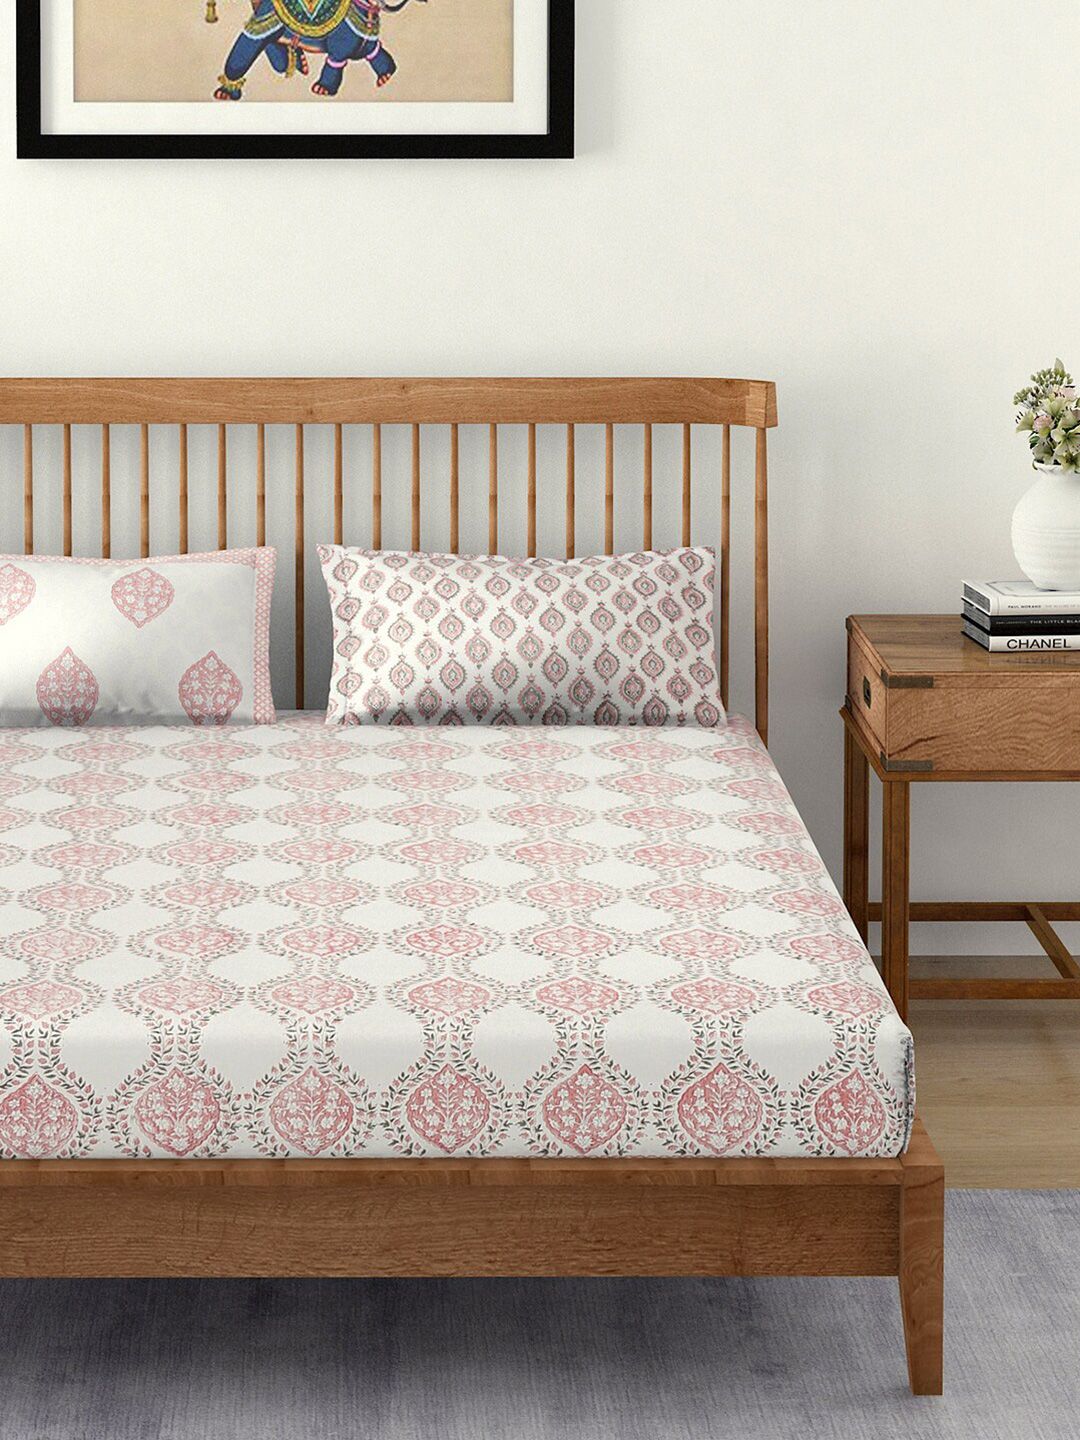 EK BY EKTA KAPOOR Off White & Pink Ethnic Motifs 120 TC King Bedsheet with 2 Pillow Covers Price in India